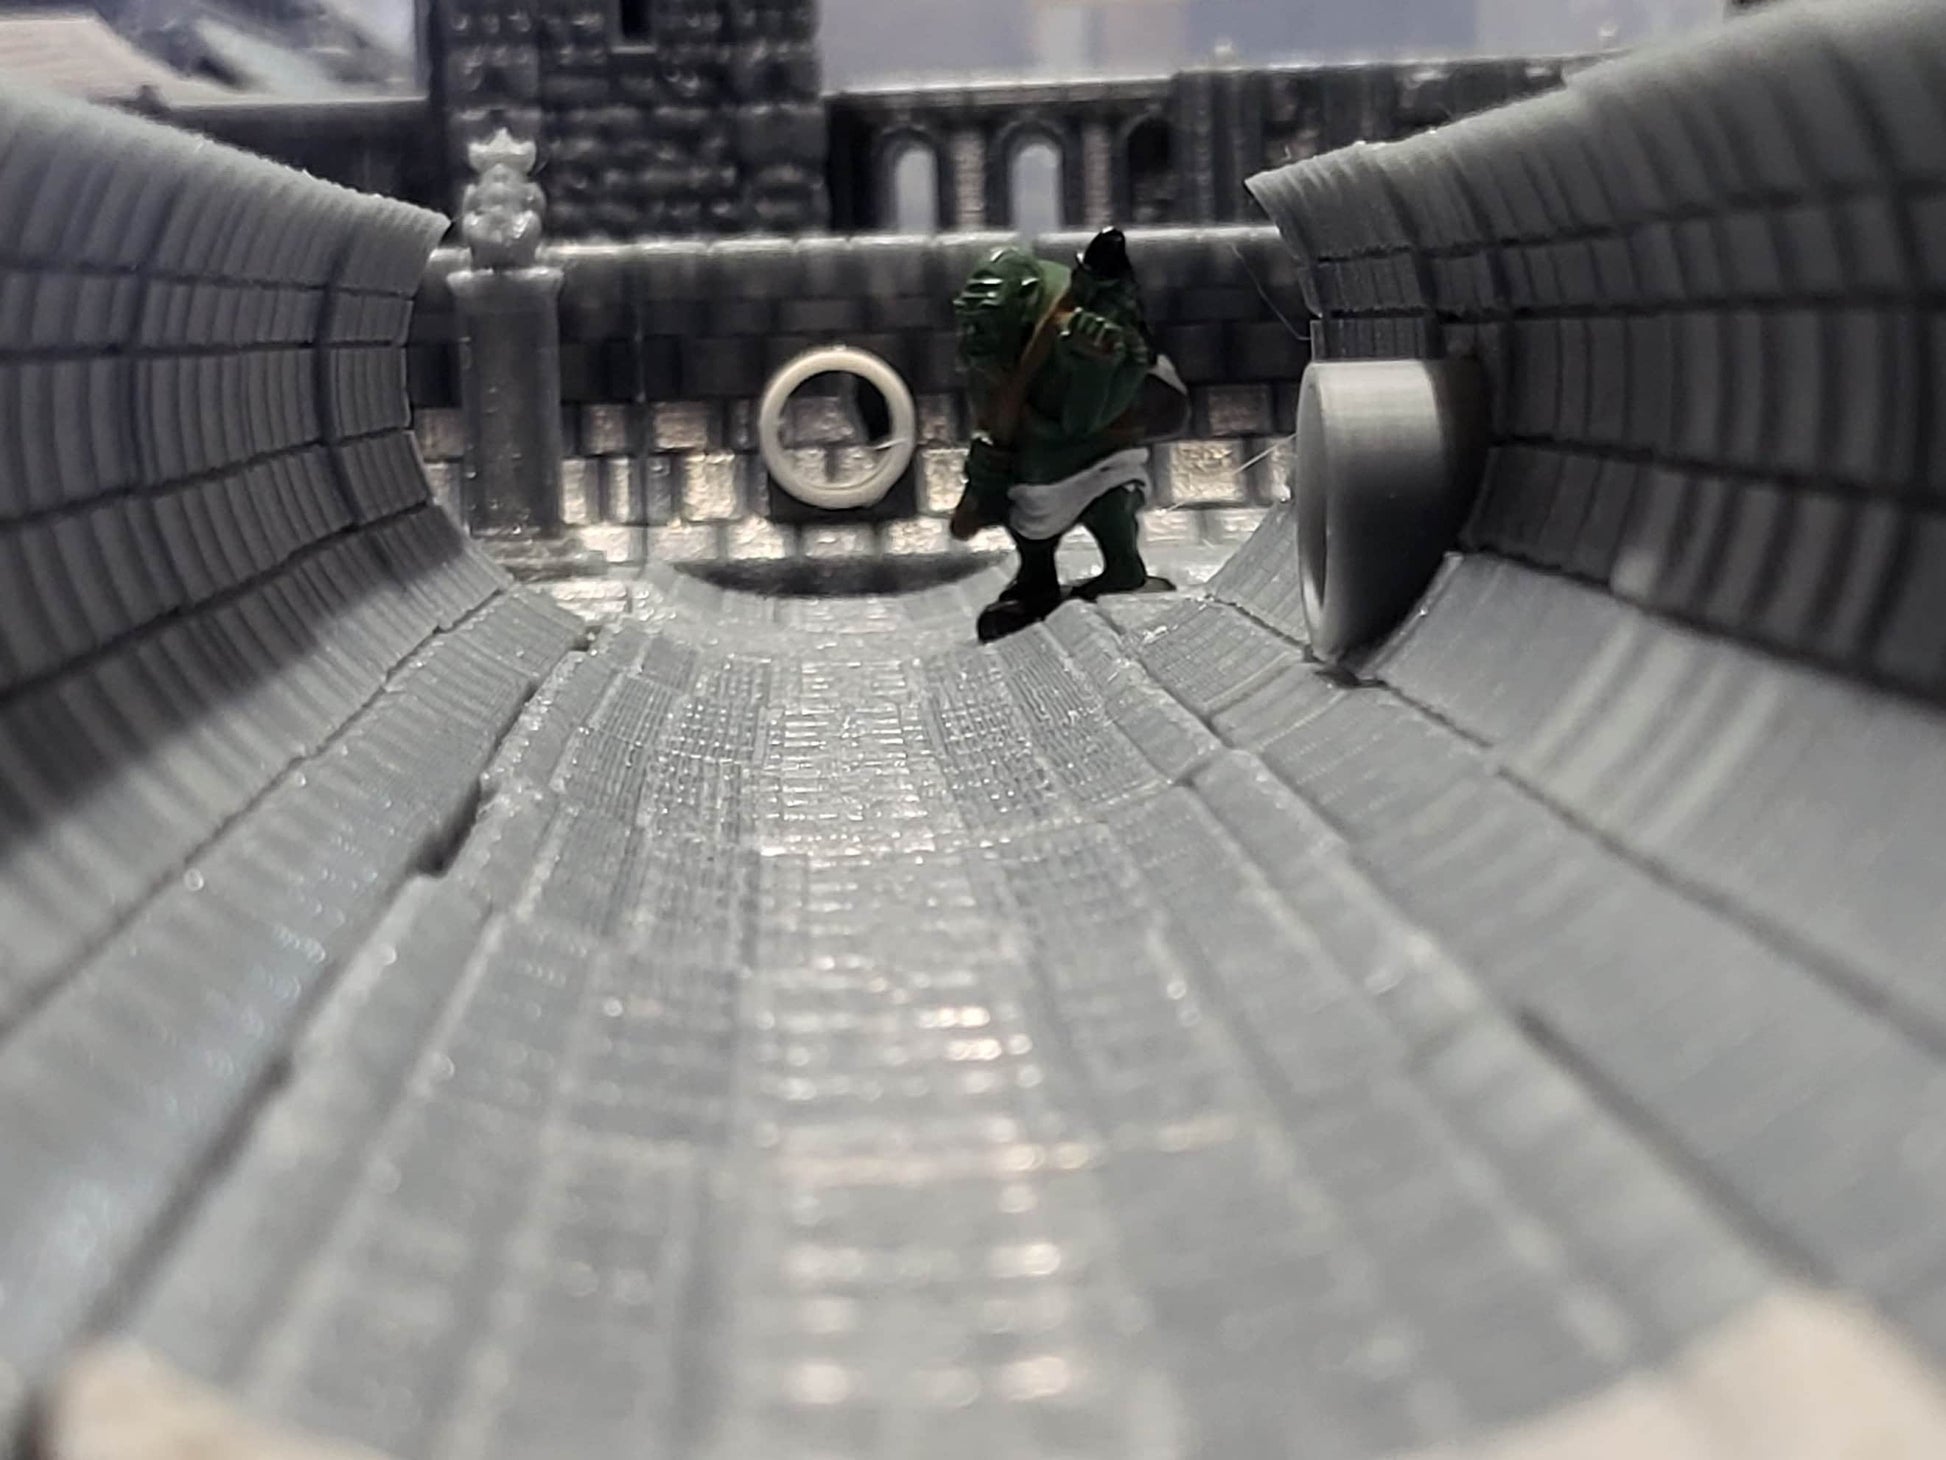 Sewer System, Underground adventure, sewer terrain, wargaming, dungeons and dragons, dungeon terrain, City sewer, Sub terrain, water pipes, pipe system, sewer way, sewer, 28mm terrain, tabletop terrain, tabletop gaming